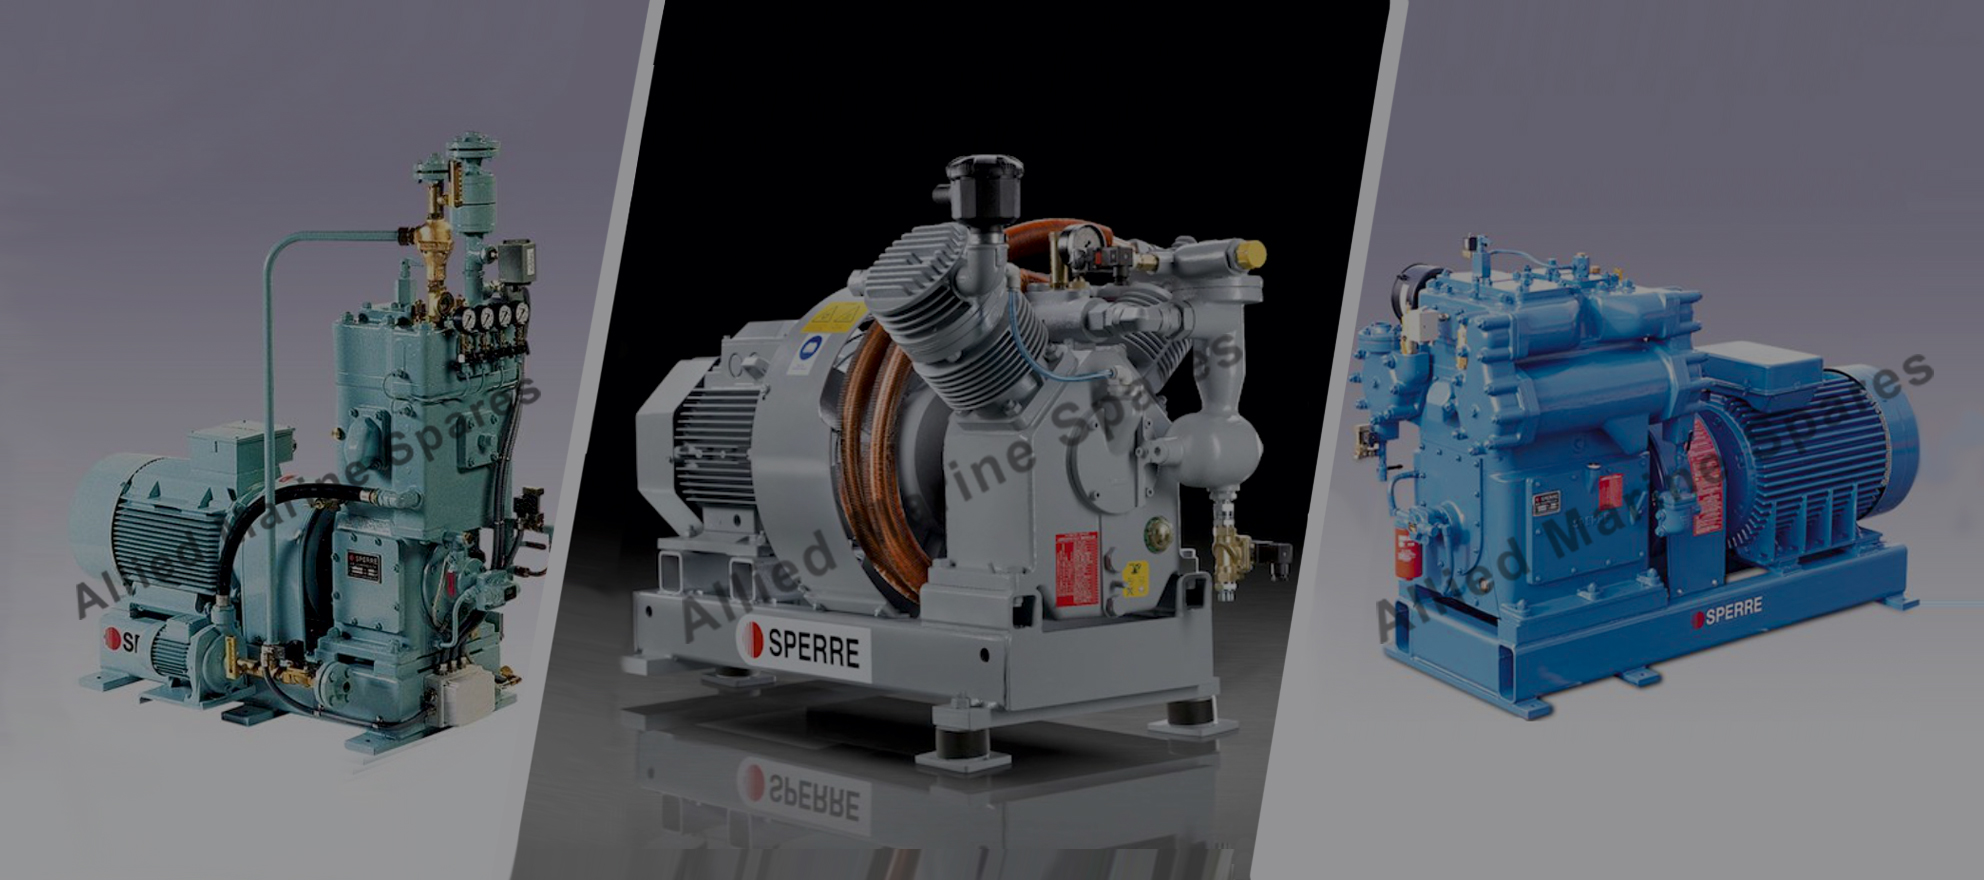 Sperre Air Compressor Spare Parts Manufacturers, Suppliers, Exporters India